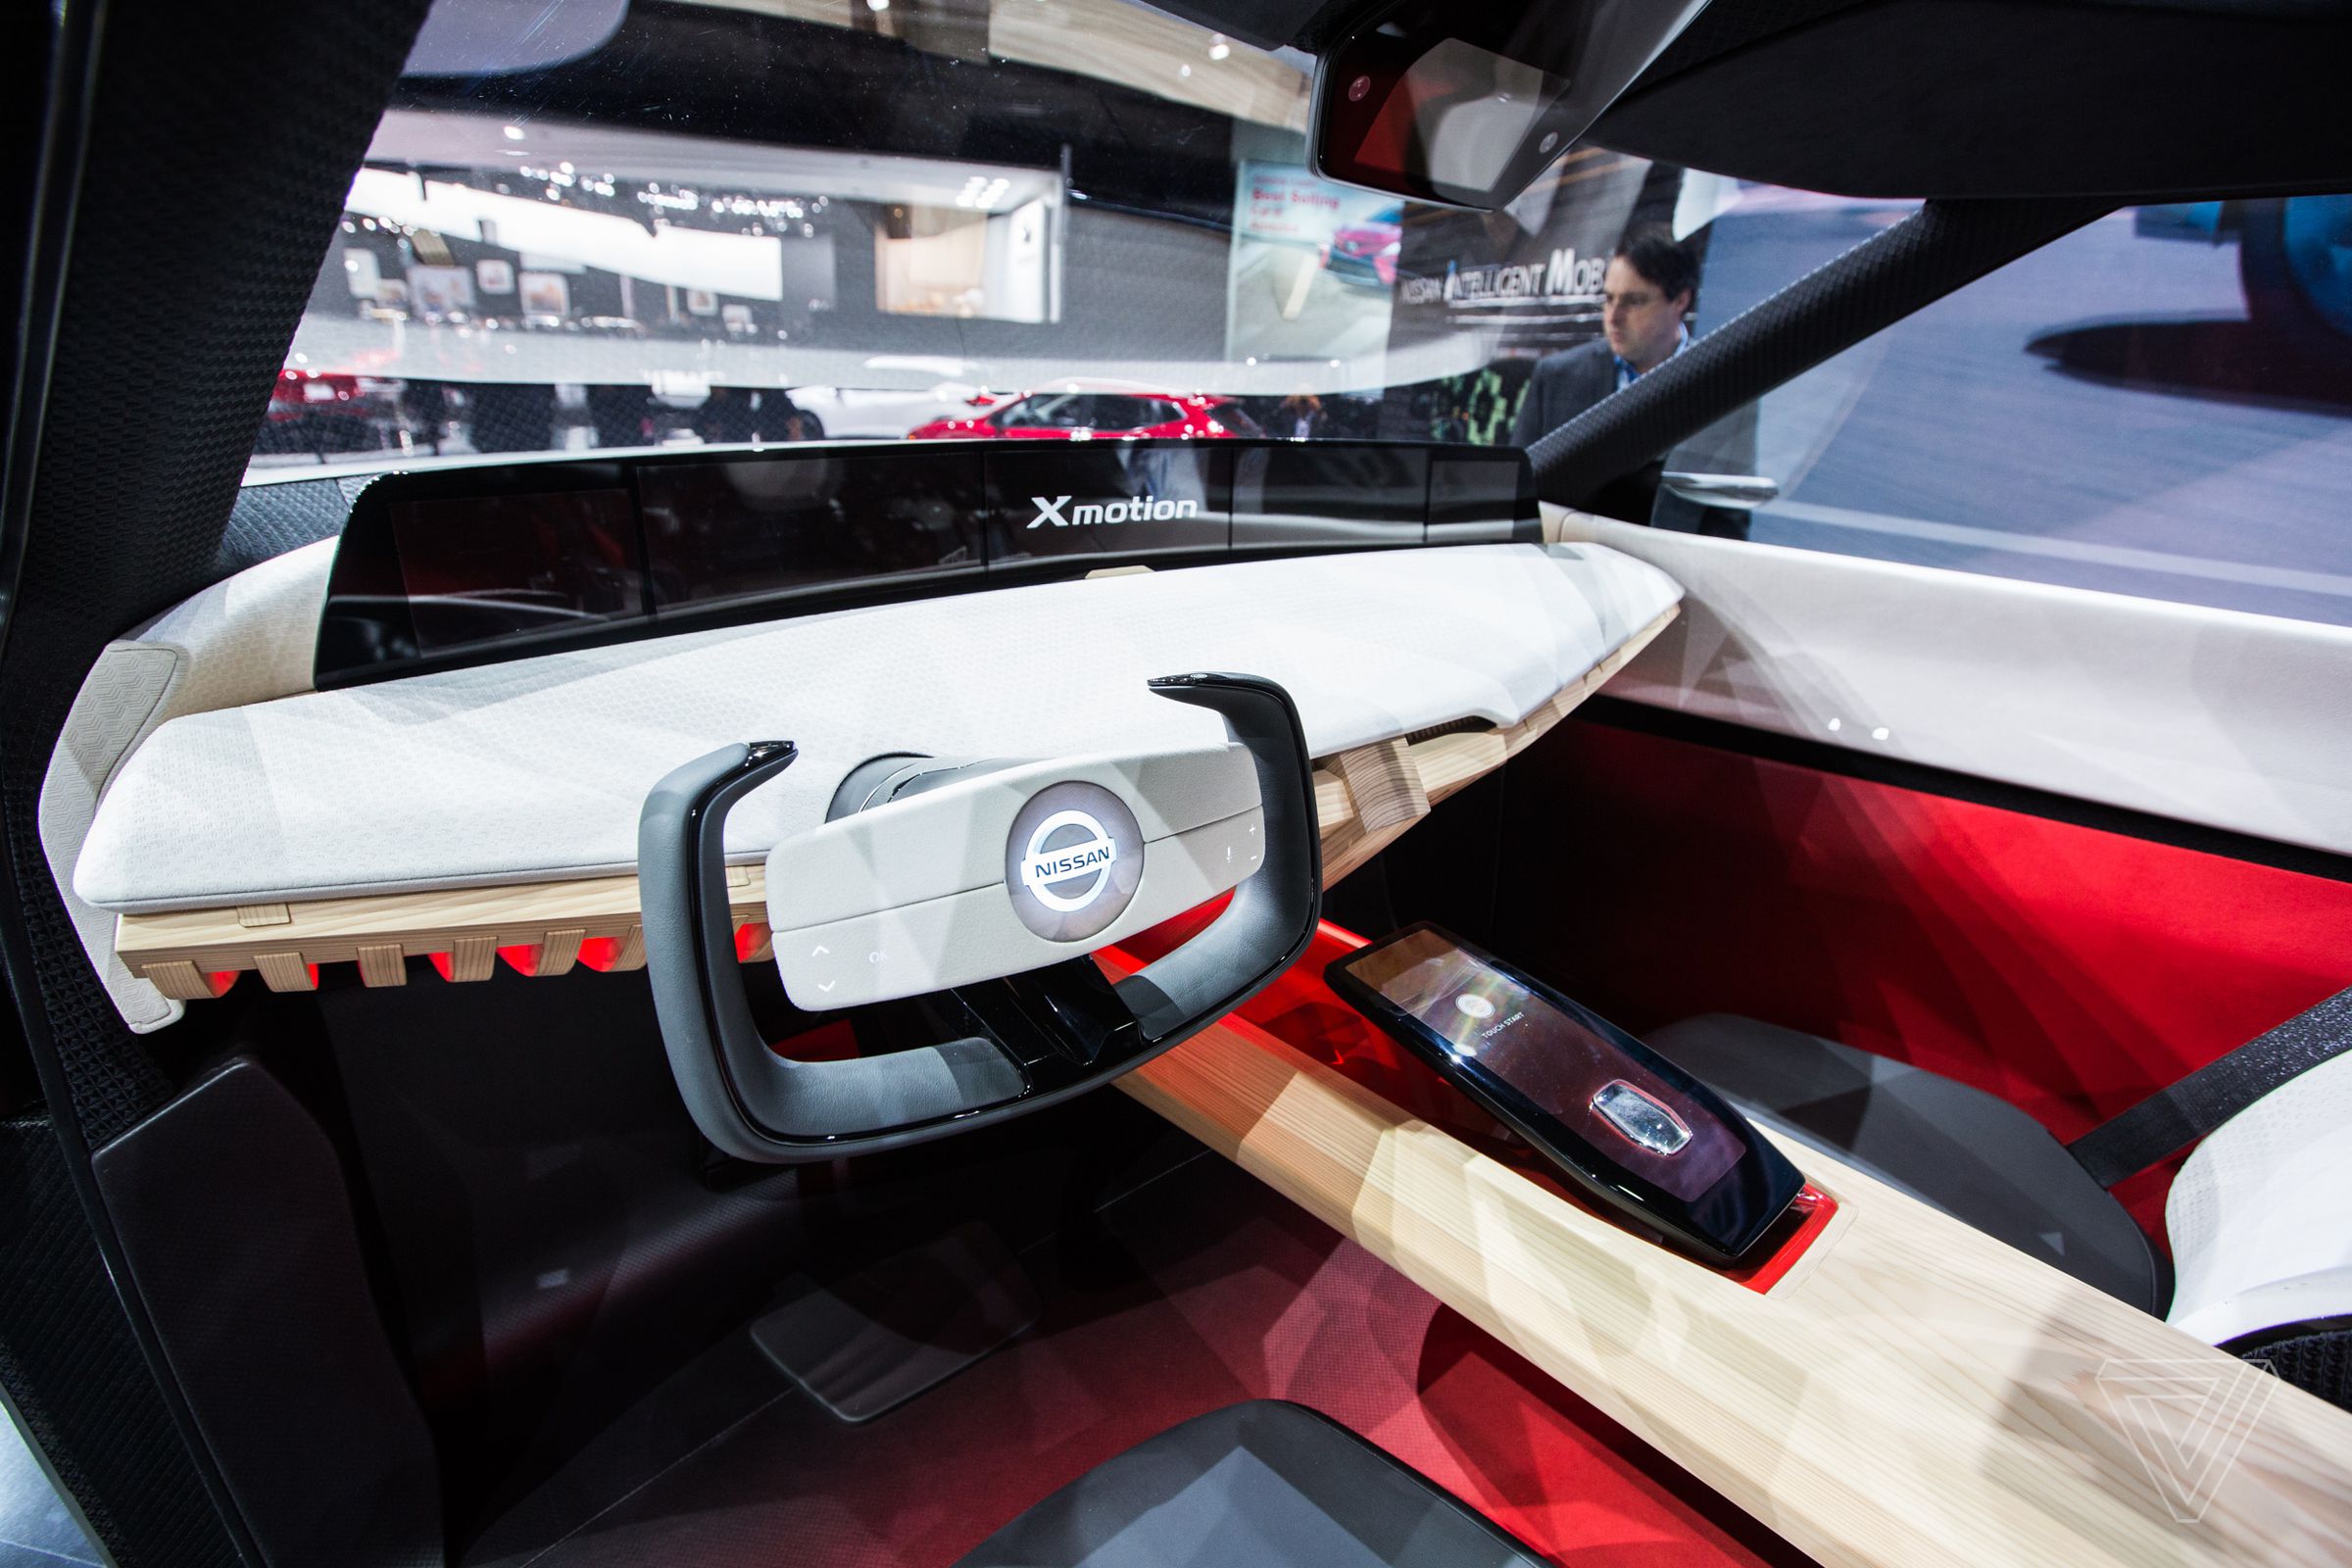 The interior of the Nissan Xmotion concept.